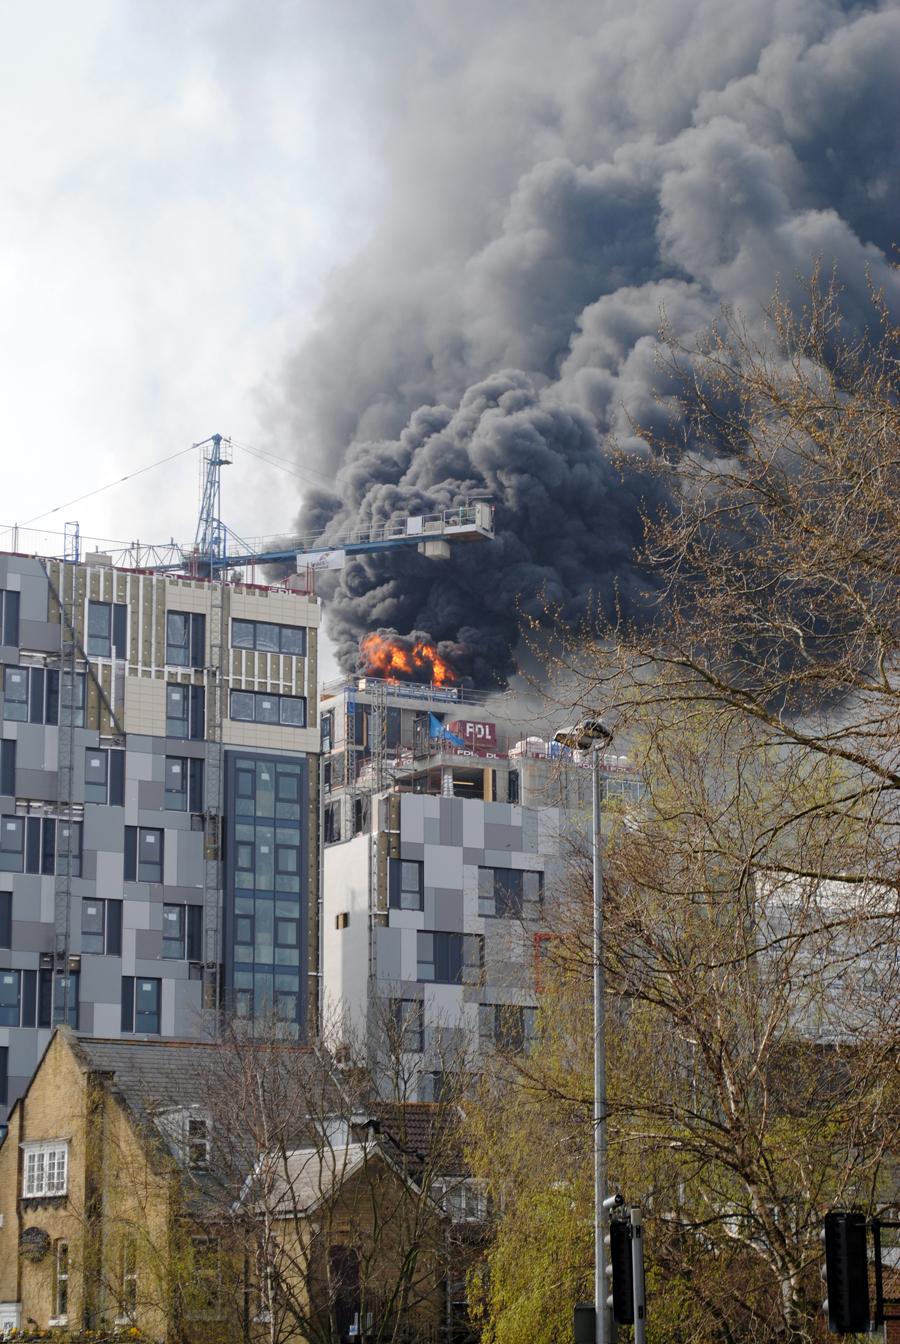 Daily Echo staff and reader pictures of the fireball and drama that engulfed the new Mayflower Halls students residence in Southampton city centre.